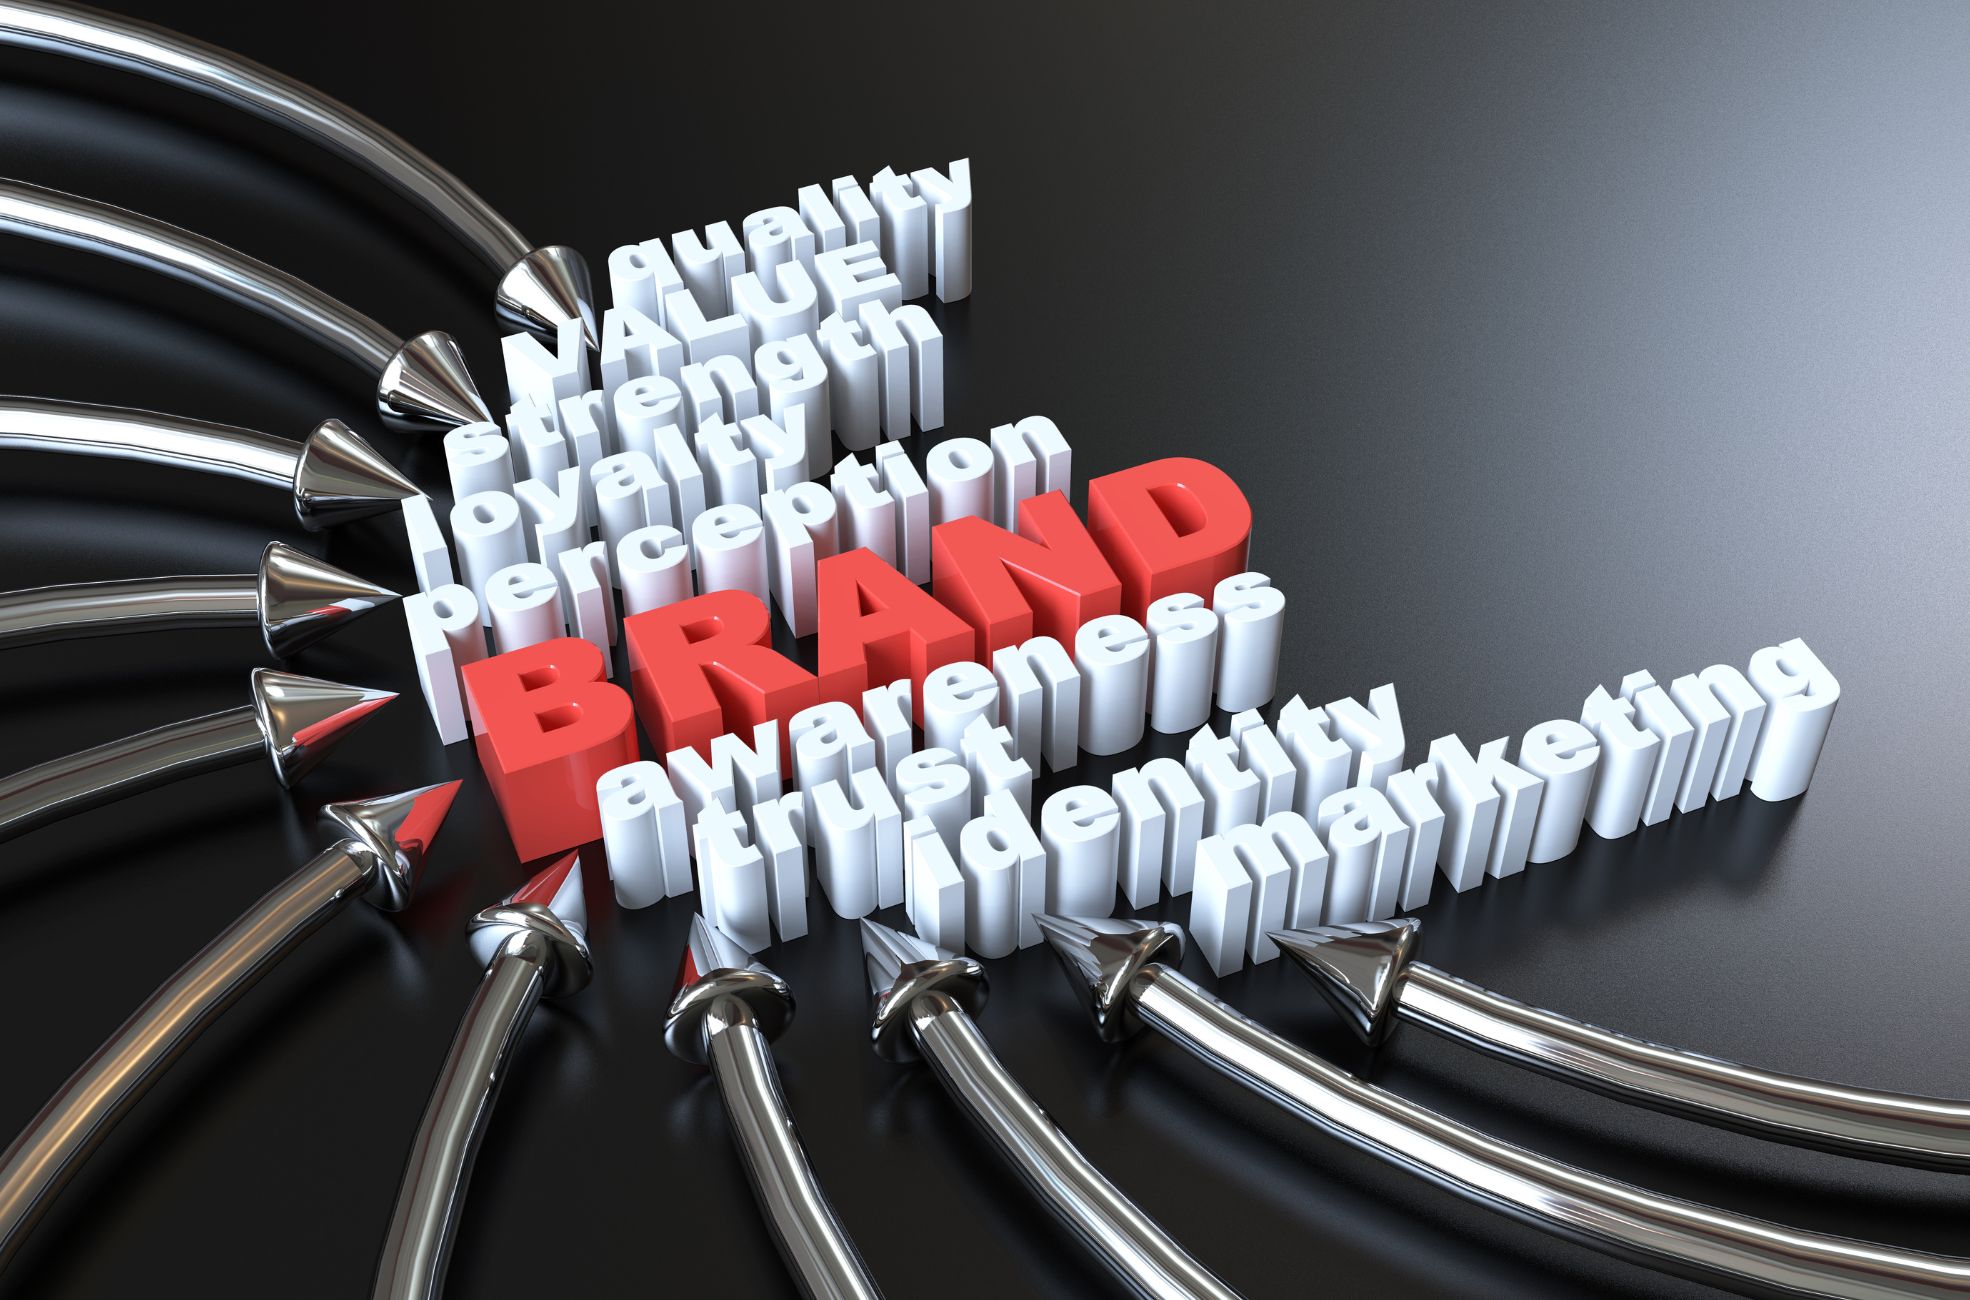 Stock Photo Of The Word Brand Showing Its Positioning